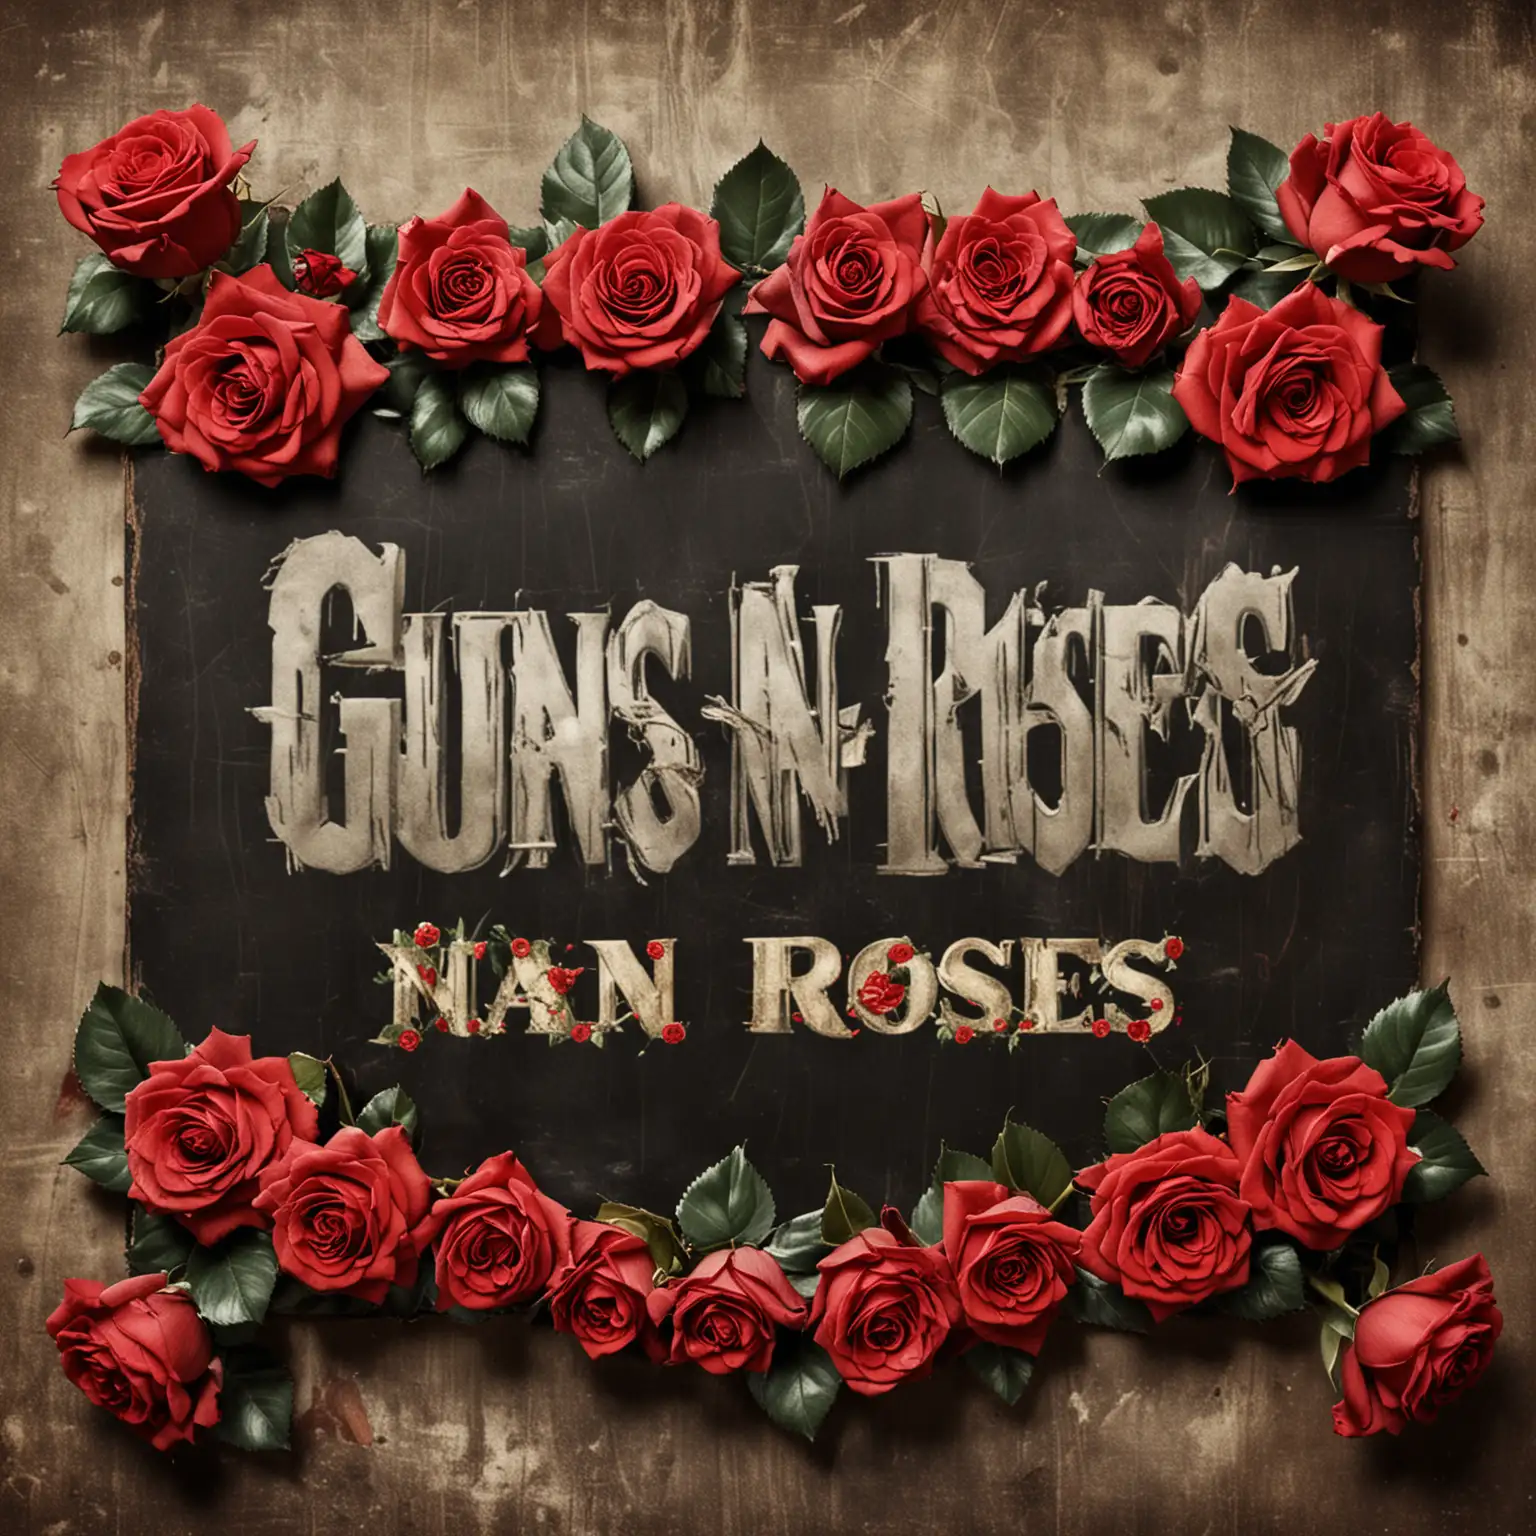 Top 5 Ranking Sign Surrounded by Red Roses Inspired by Guns N Roses Album Cover